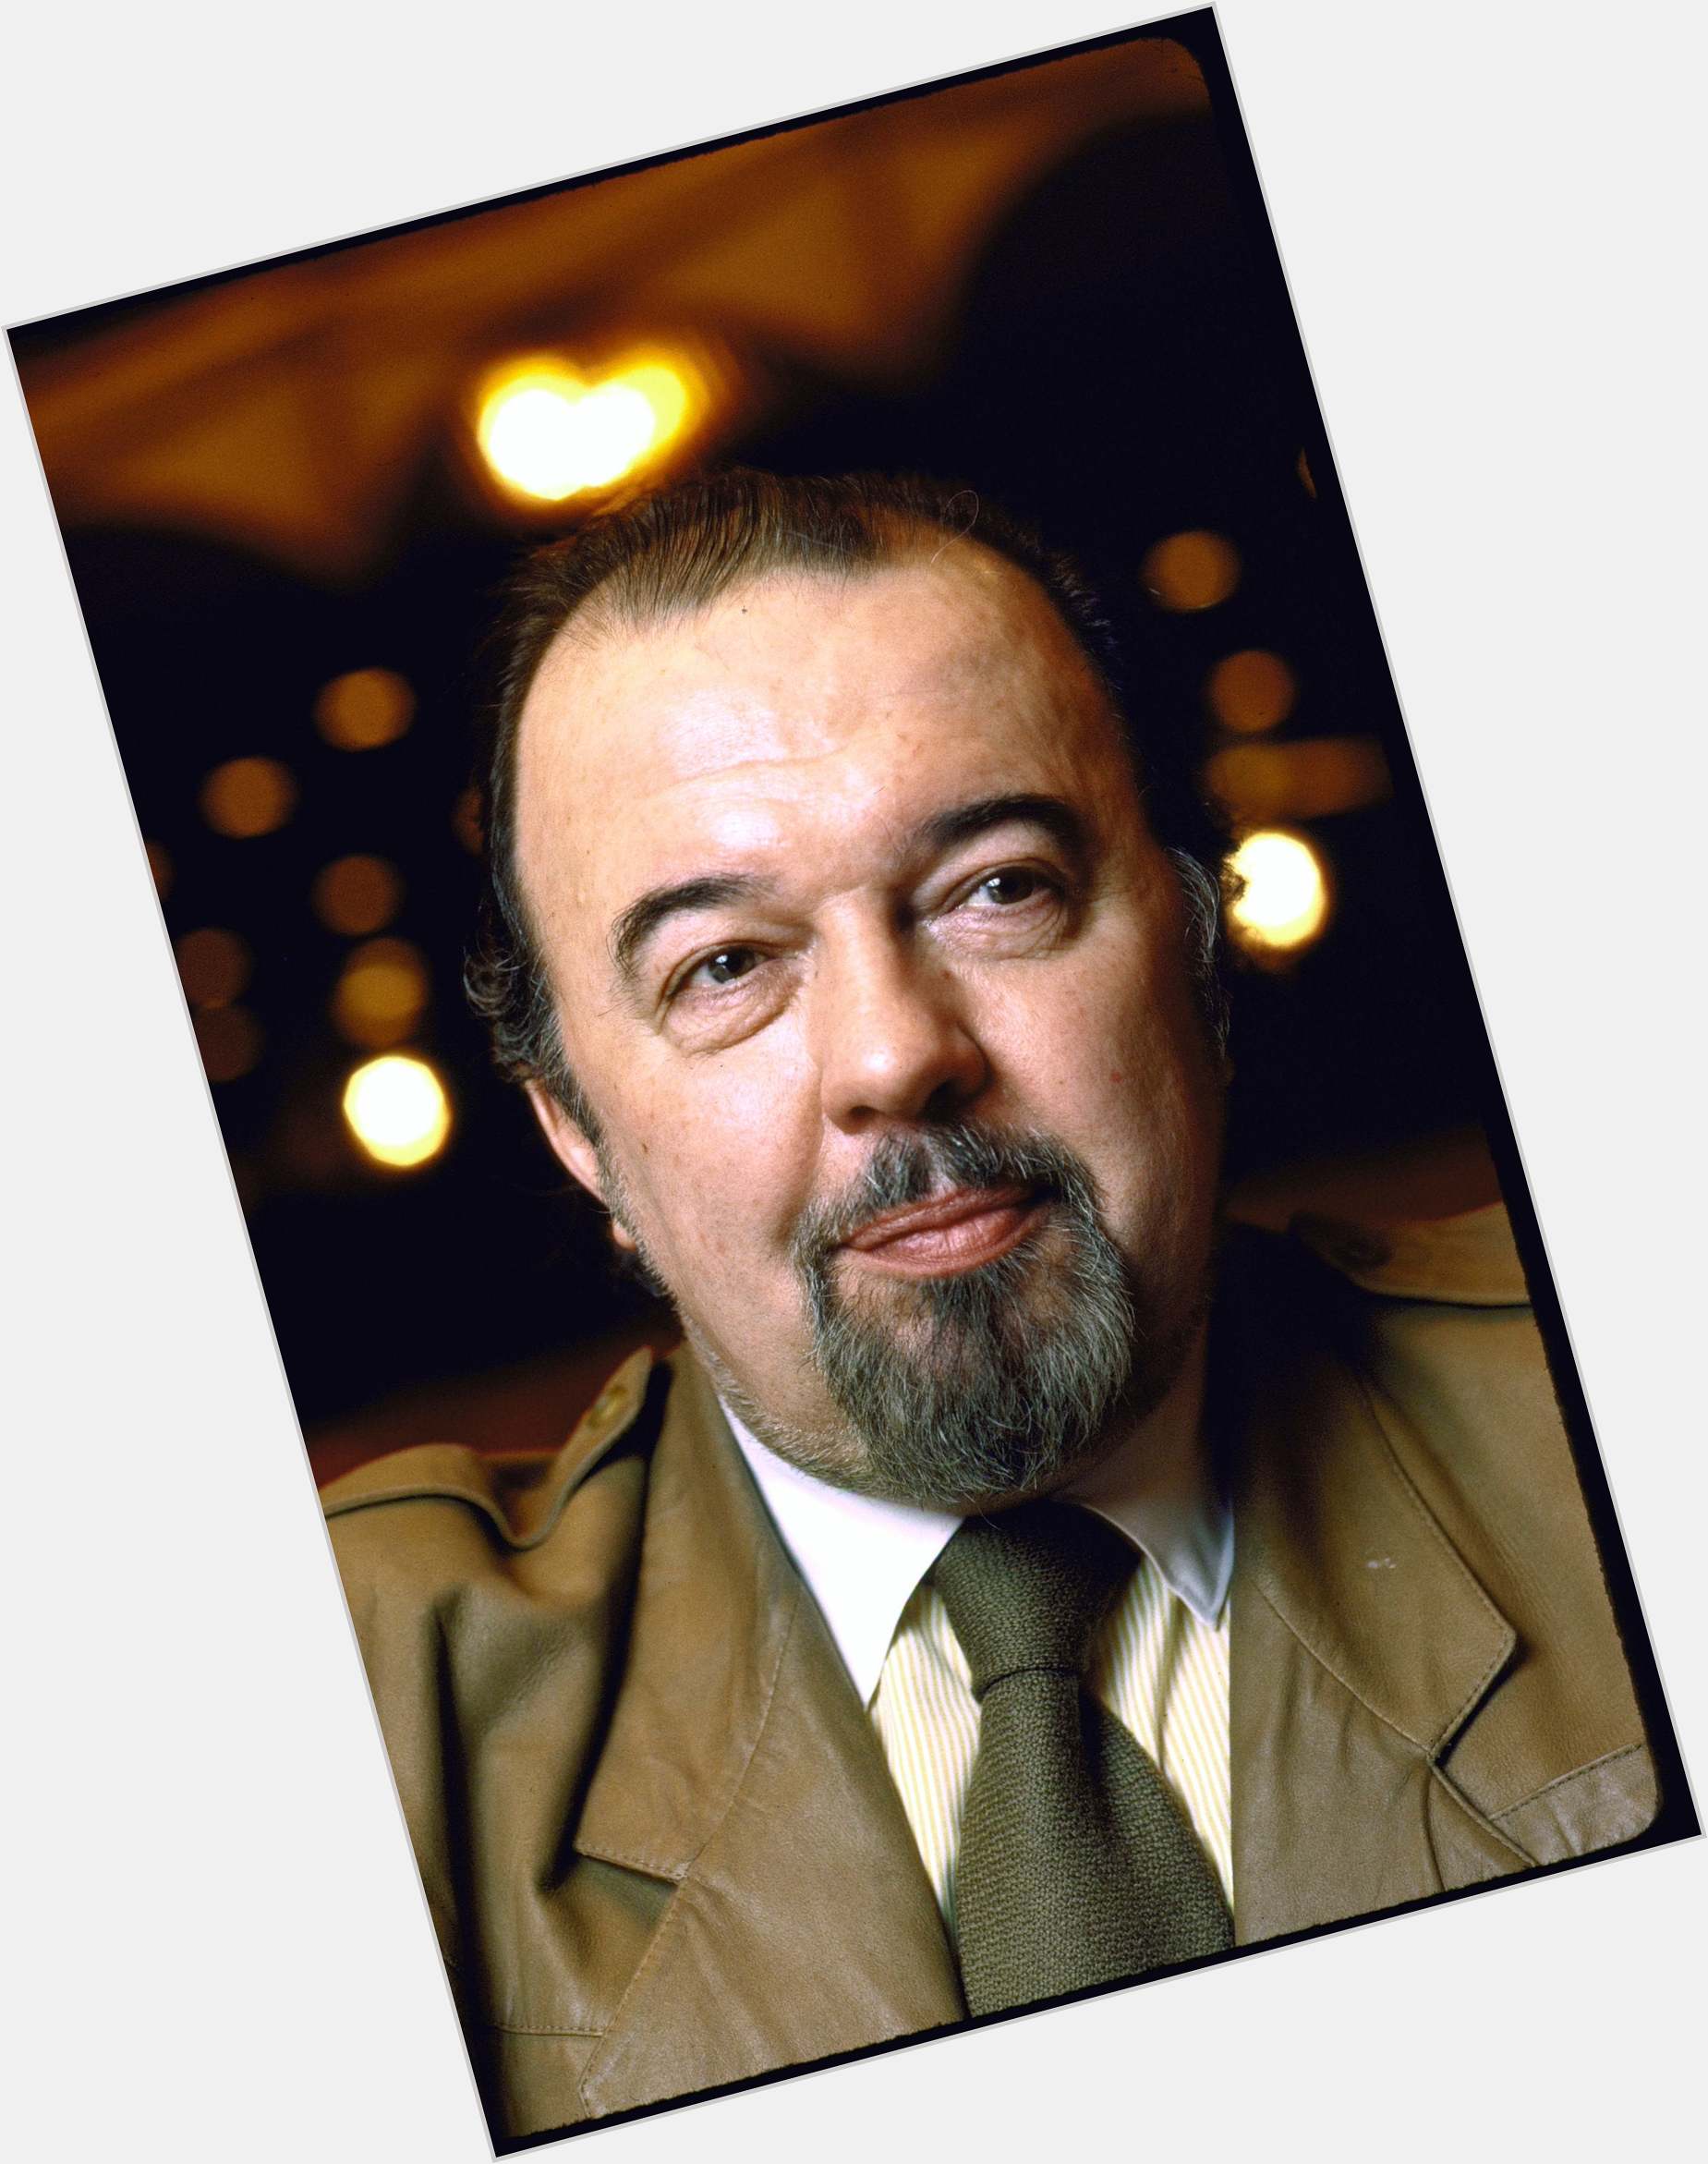 <a href="/hot-men/peter-hall/is-he-halley-kevin-sir">Peter Hall</a>  